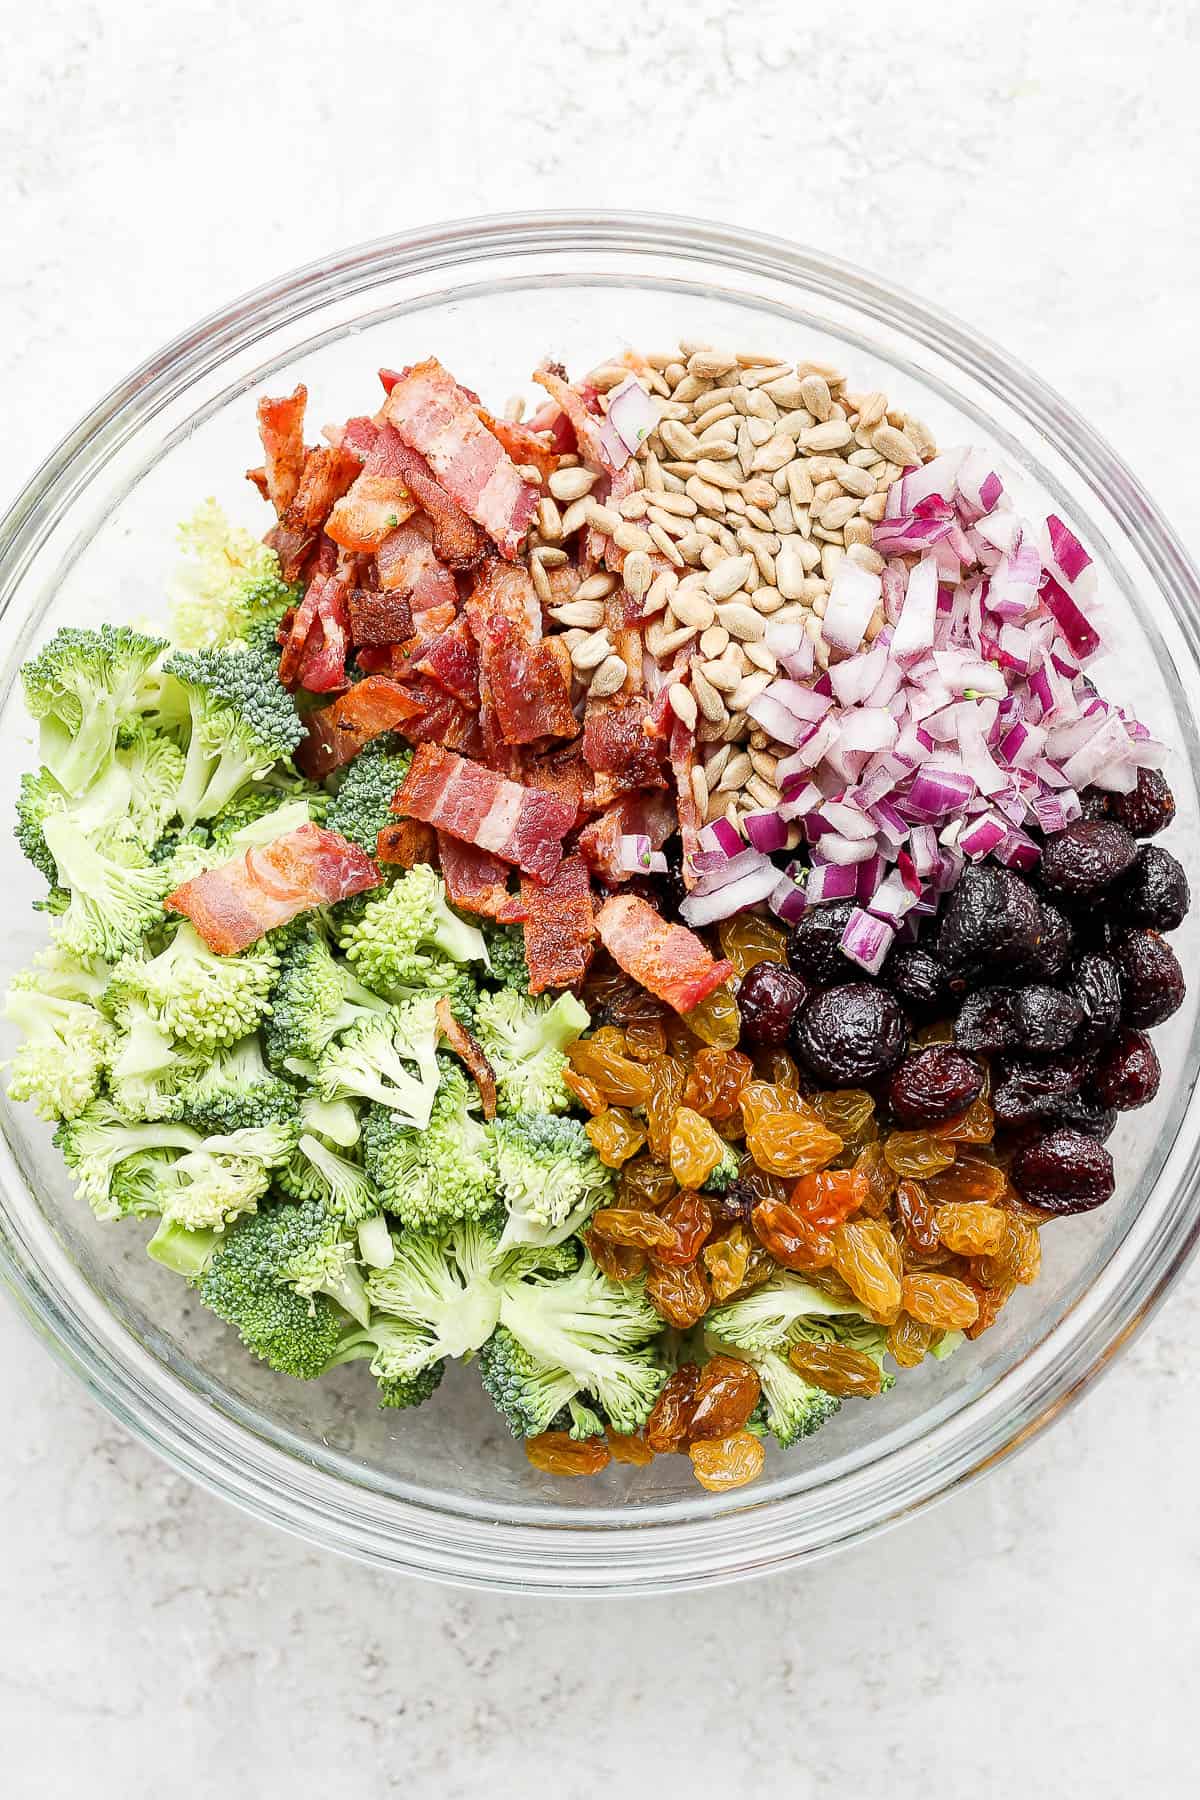 Ingredients for broccoli bacon salad in a large mixing bowl.